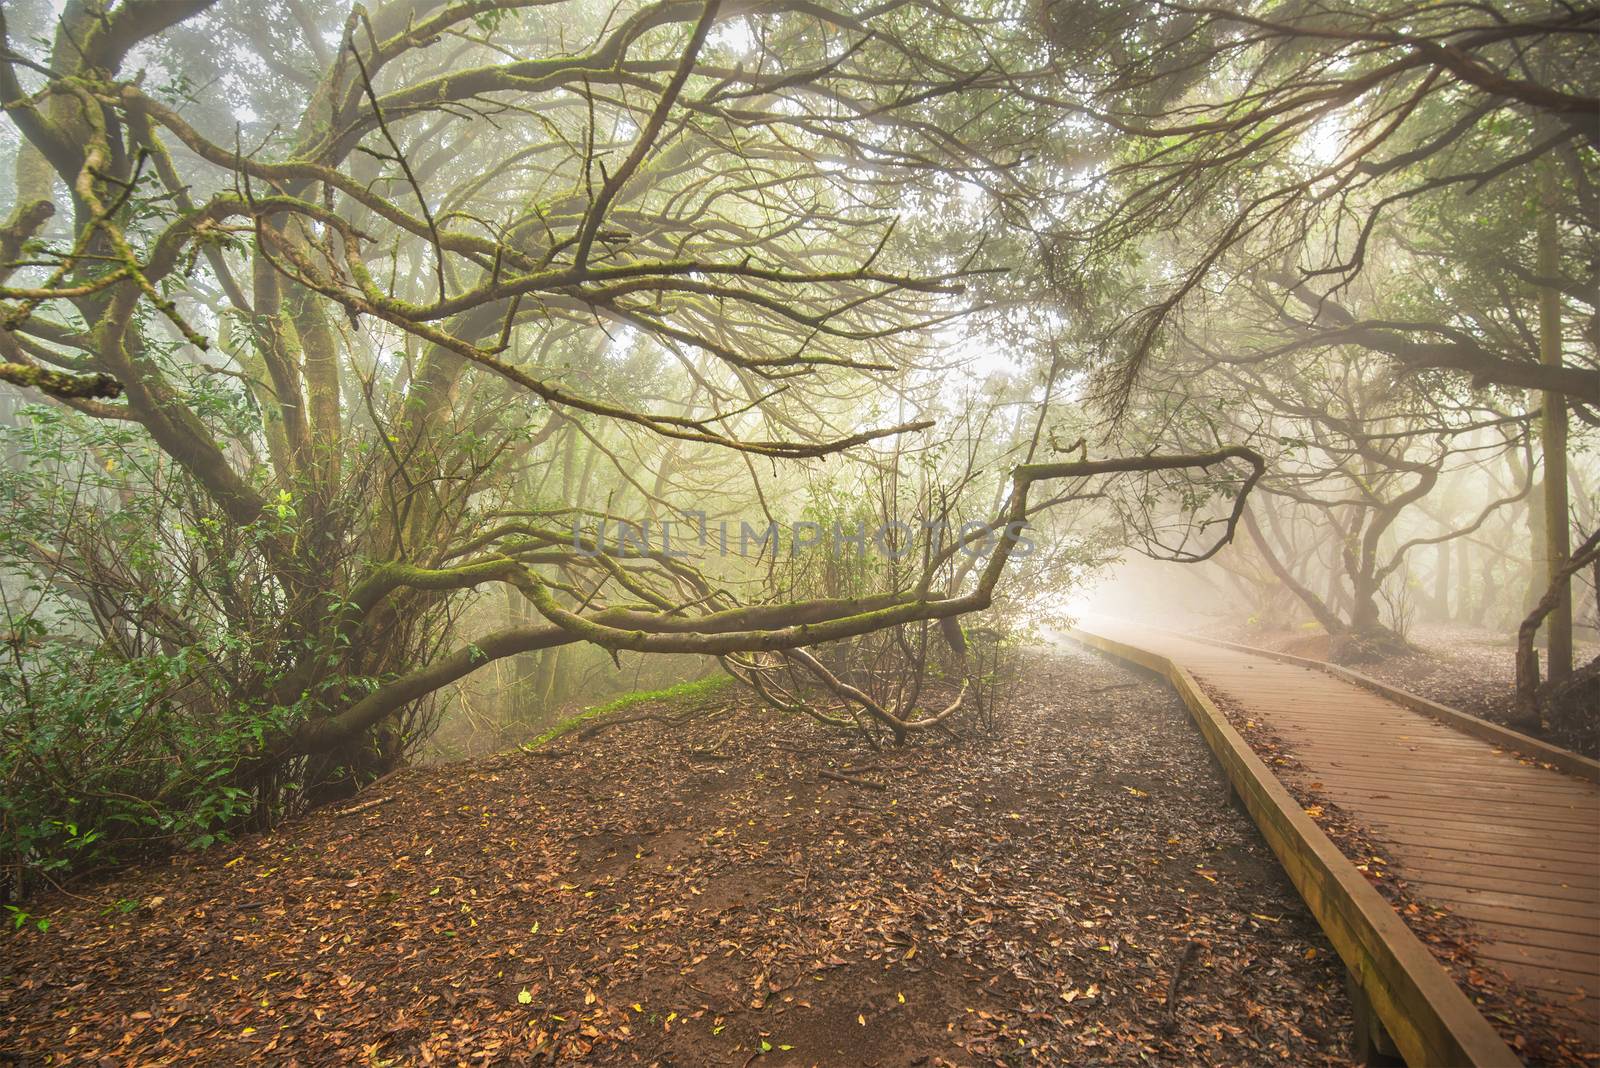 Misty forest in Anaga mountains, Tenerife, Canary island, Spain.